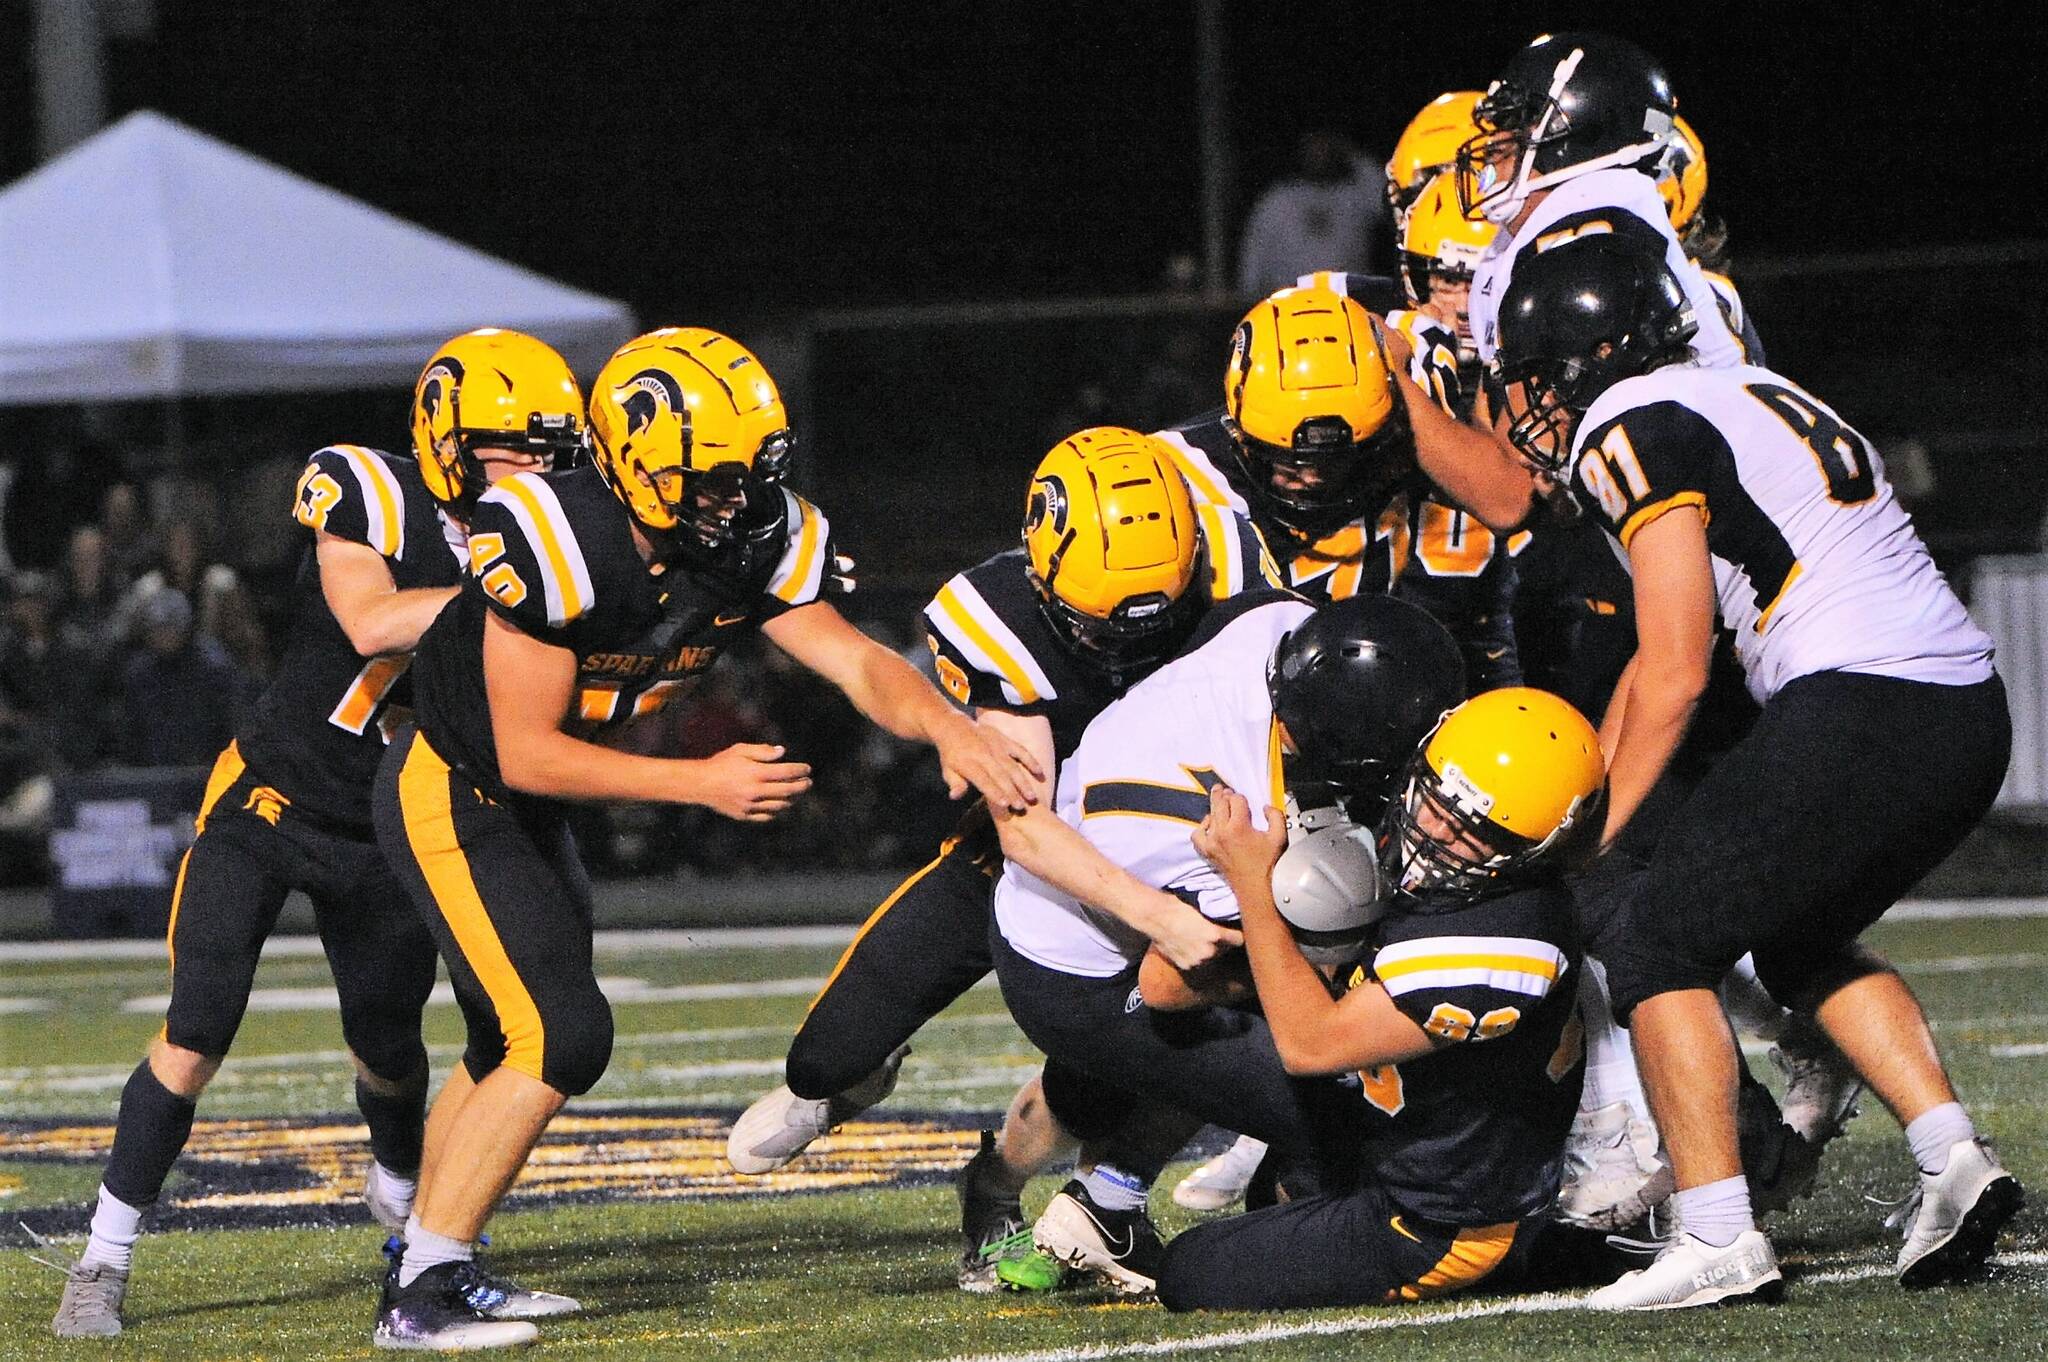 The Spartan defense was outstanding as was the defense pictured here on this gang tackle as Forks took a 49 to 0 halftime lead. Photo by Lonnie Archibald